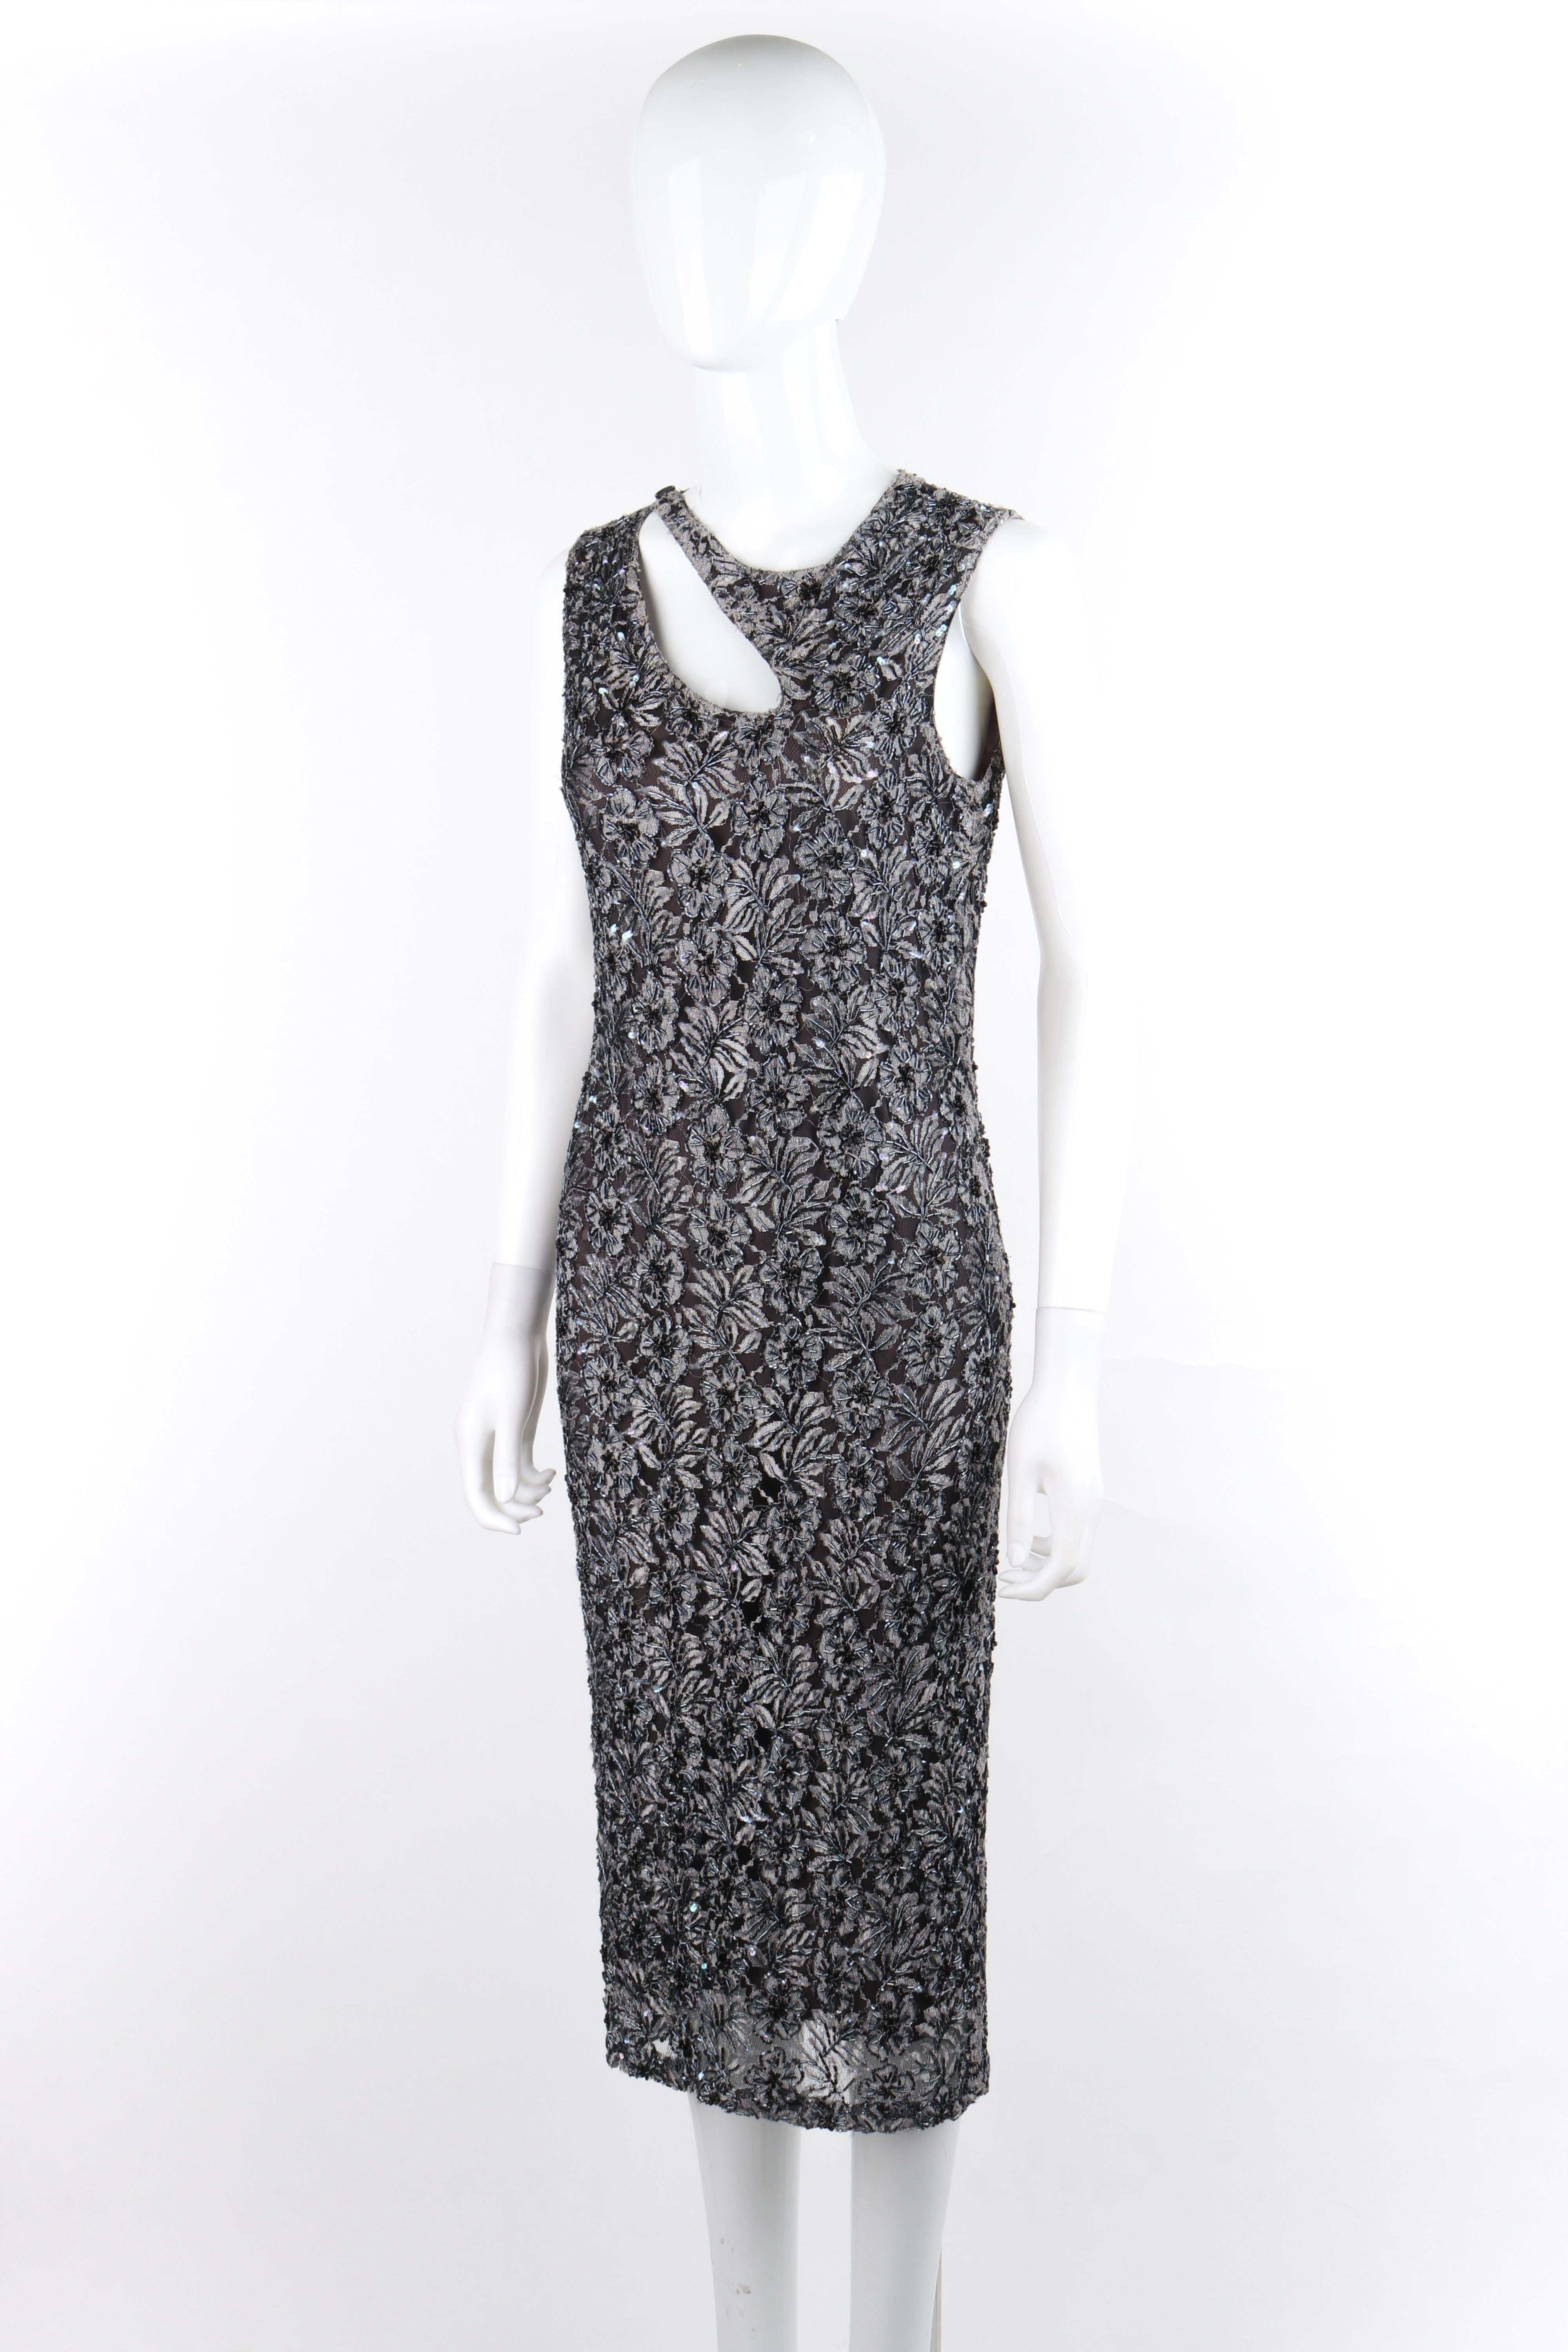 ALEXANDER McQUEEN c.1999 Vtg Grey Sequin Beaded Lace Embellished Cutout Dress For Sale 4